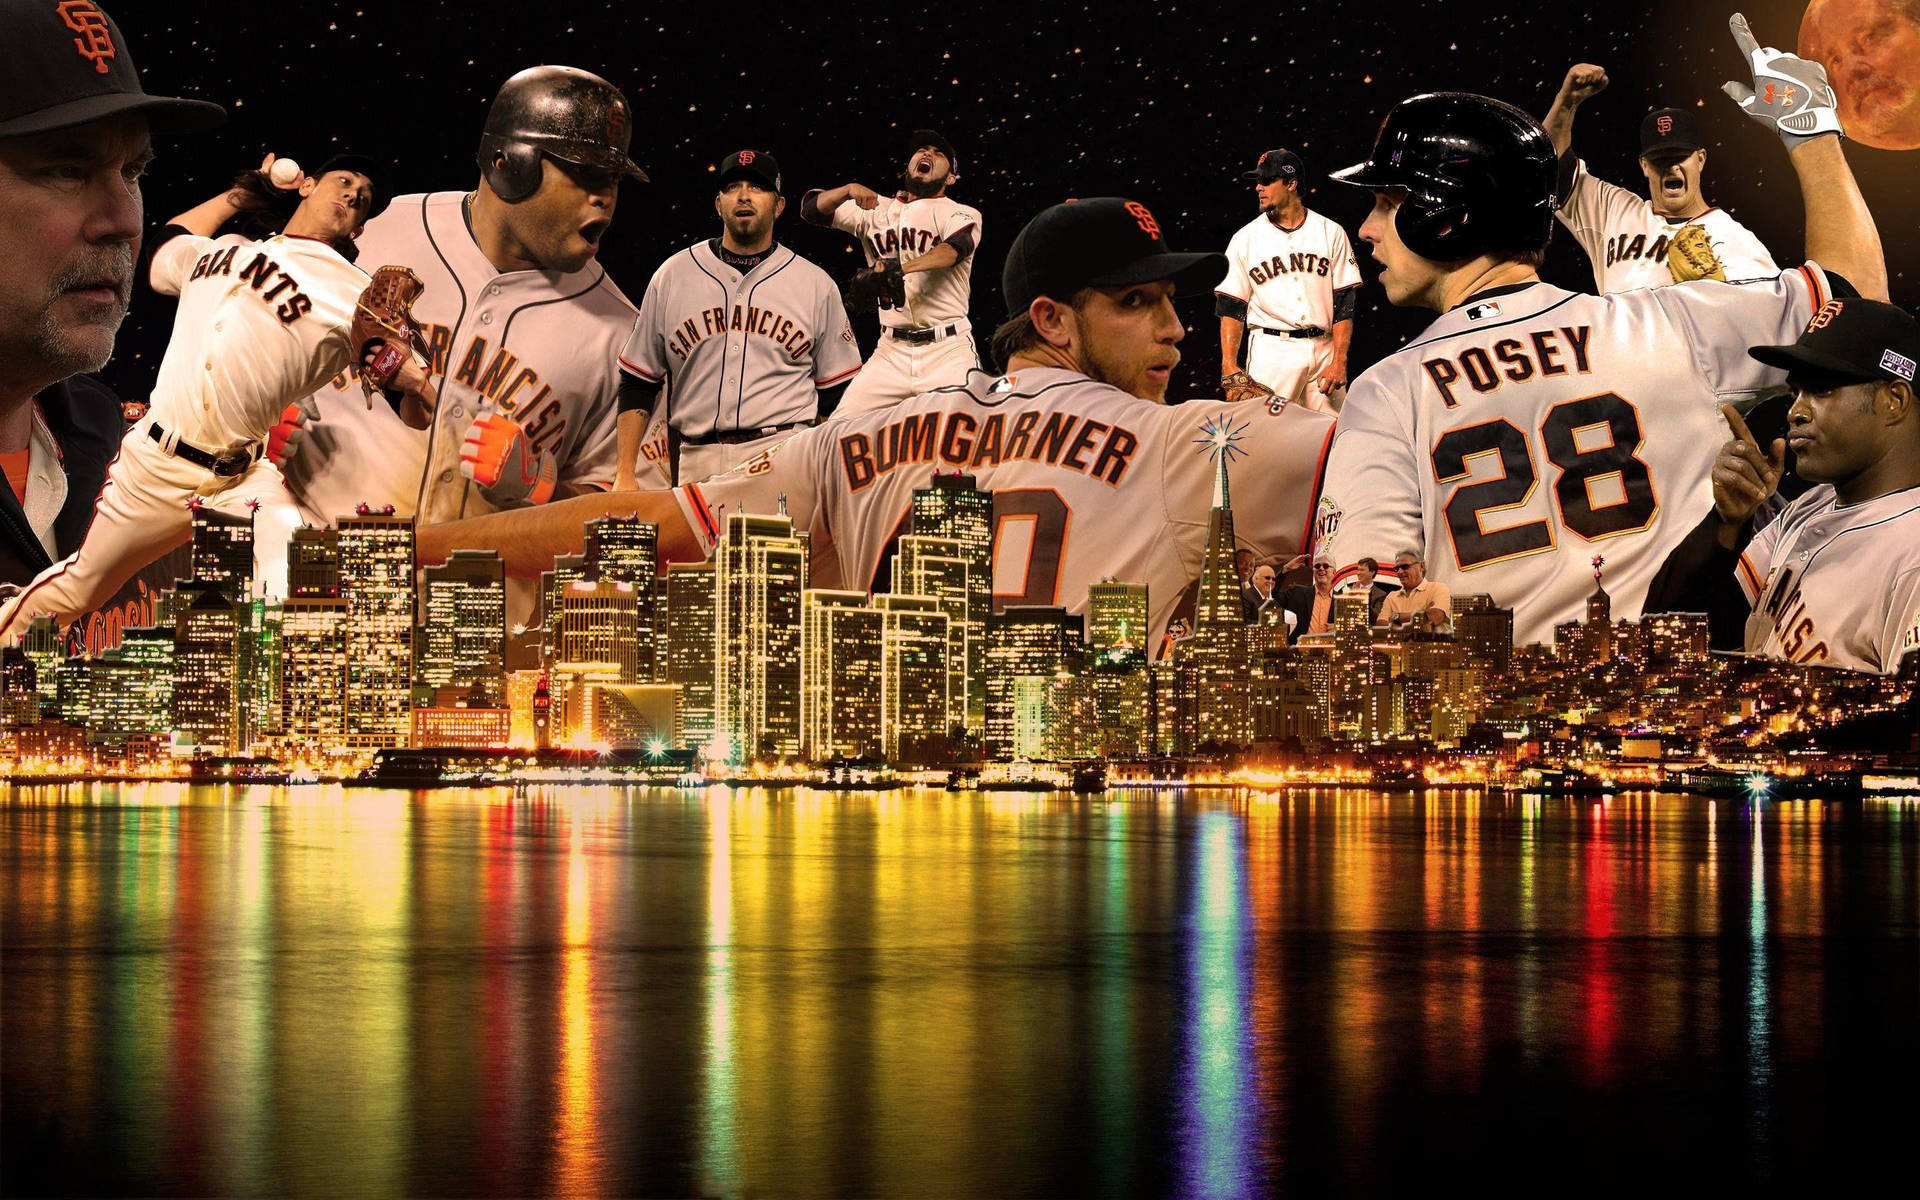 200+] Posey Wallpapers